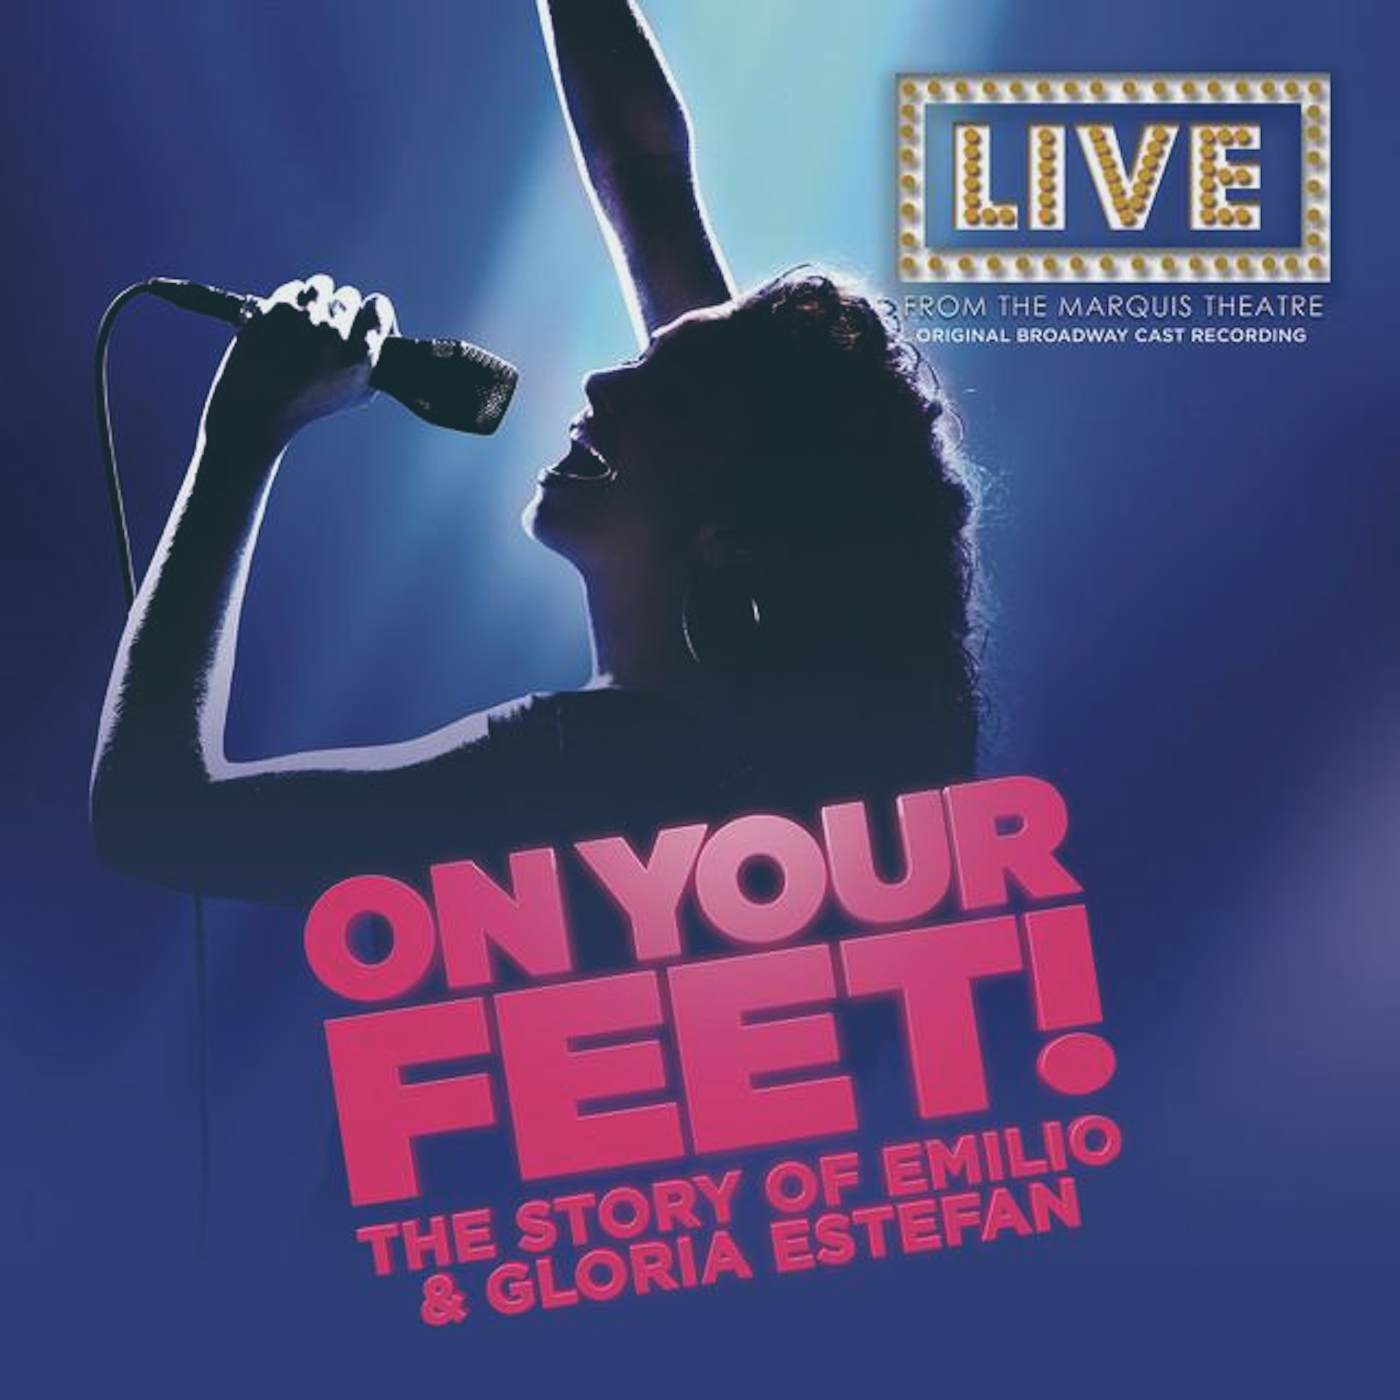 ON YOUR FEET: THE STORY OF EMILIO & GLORIA